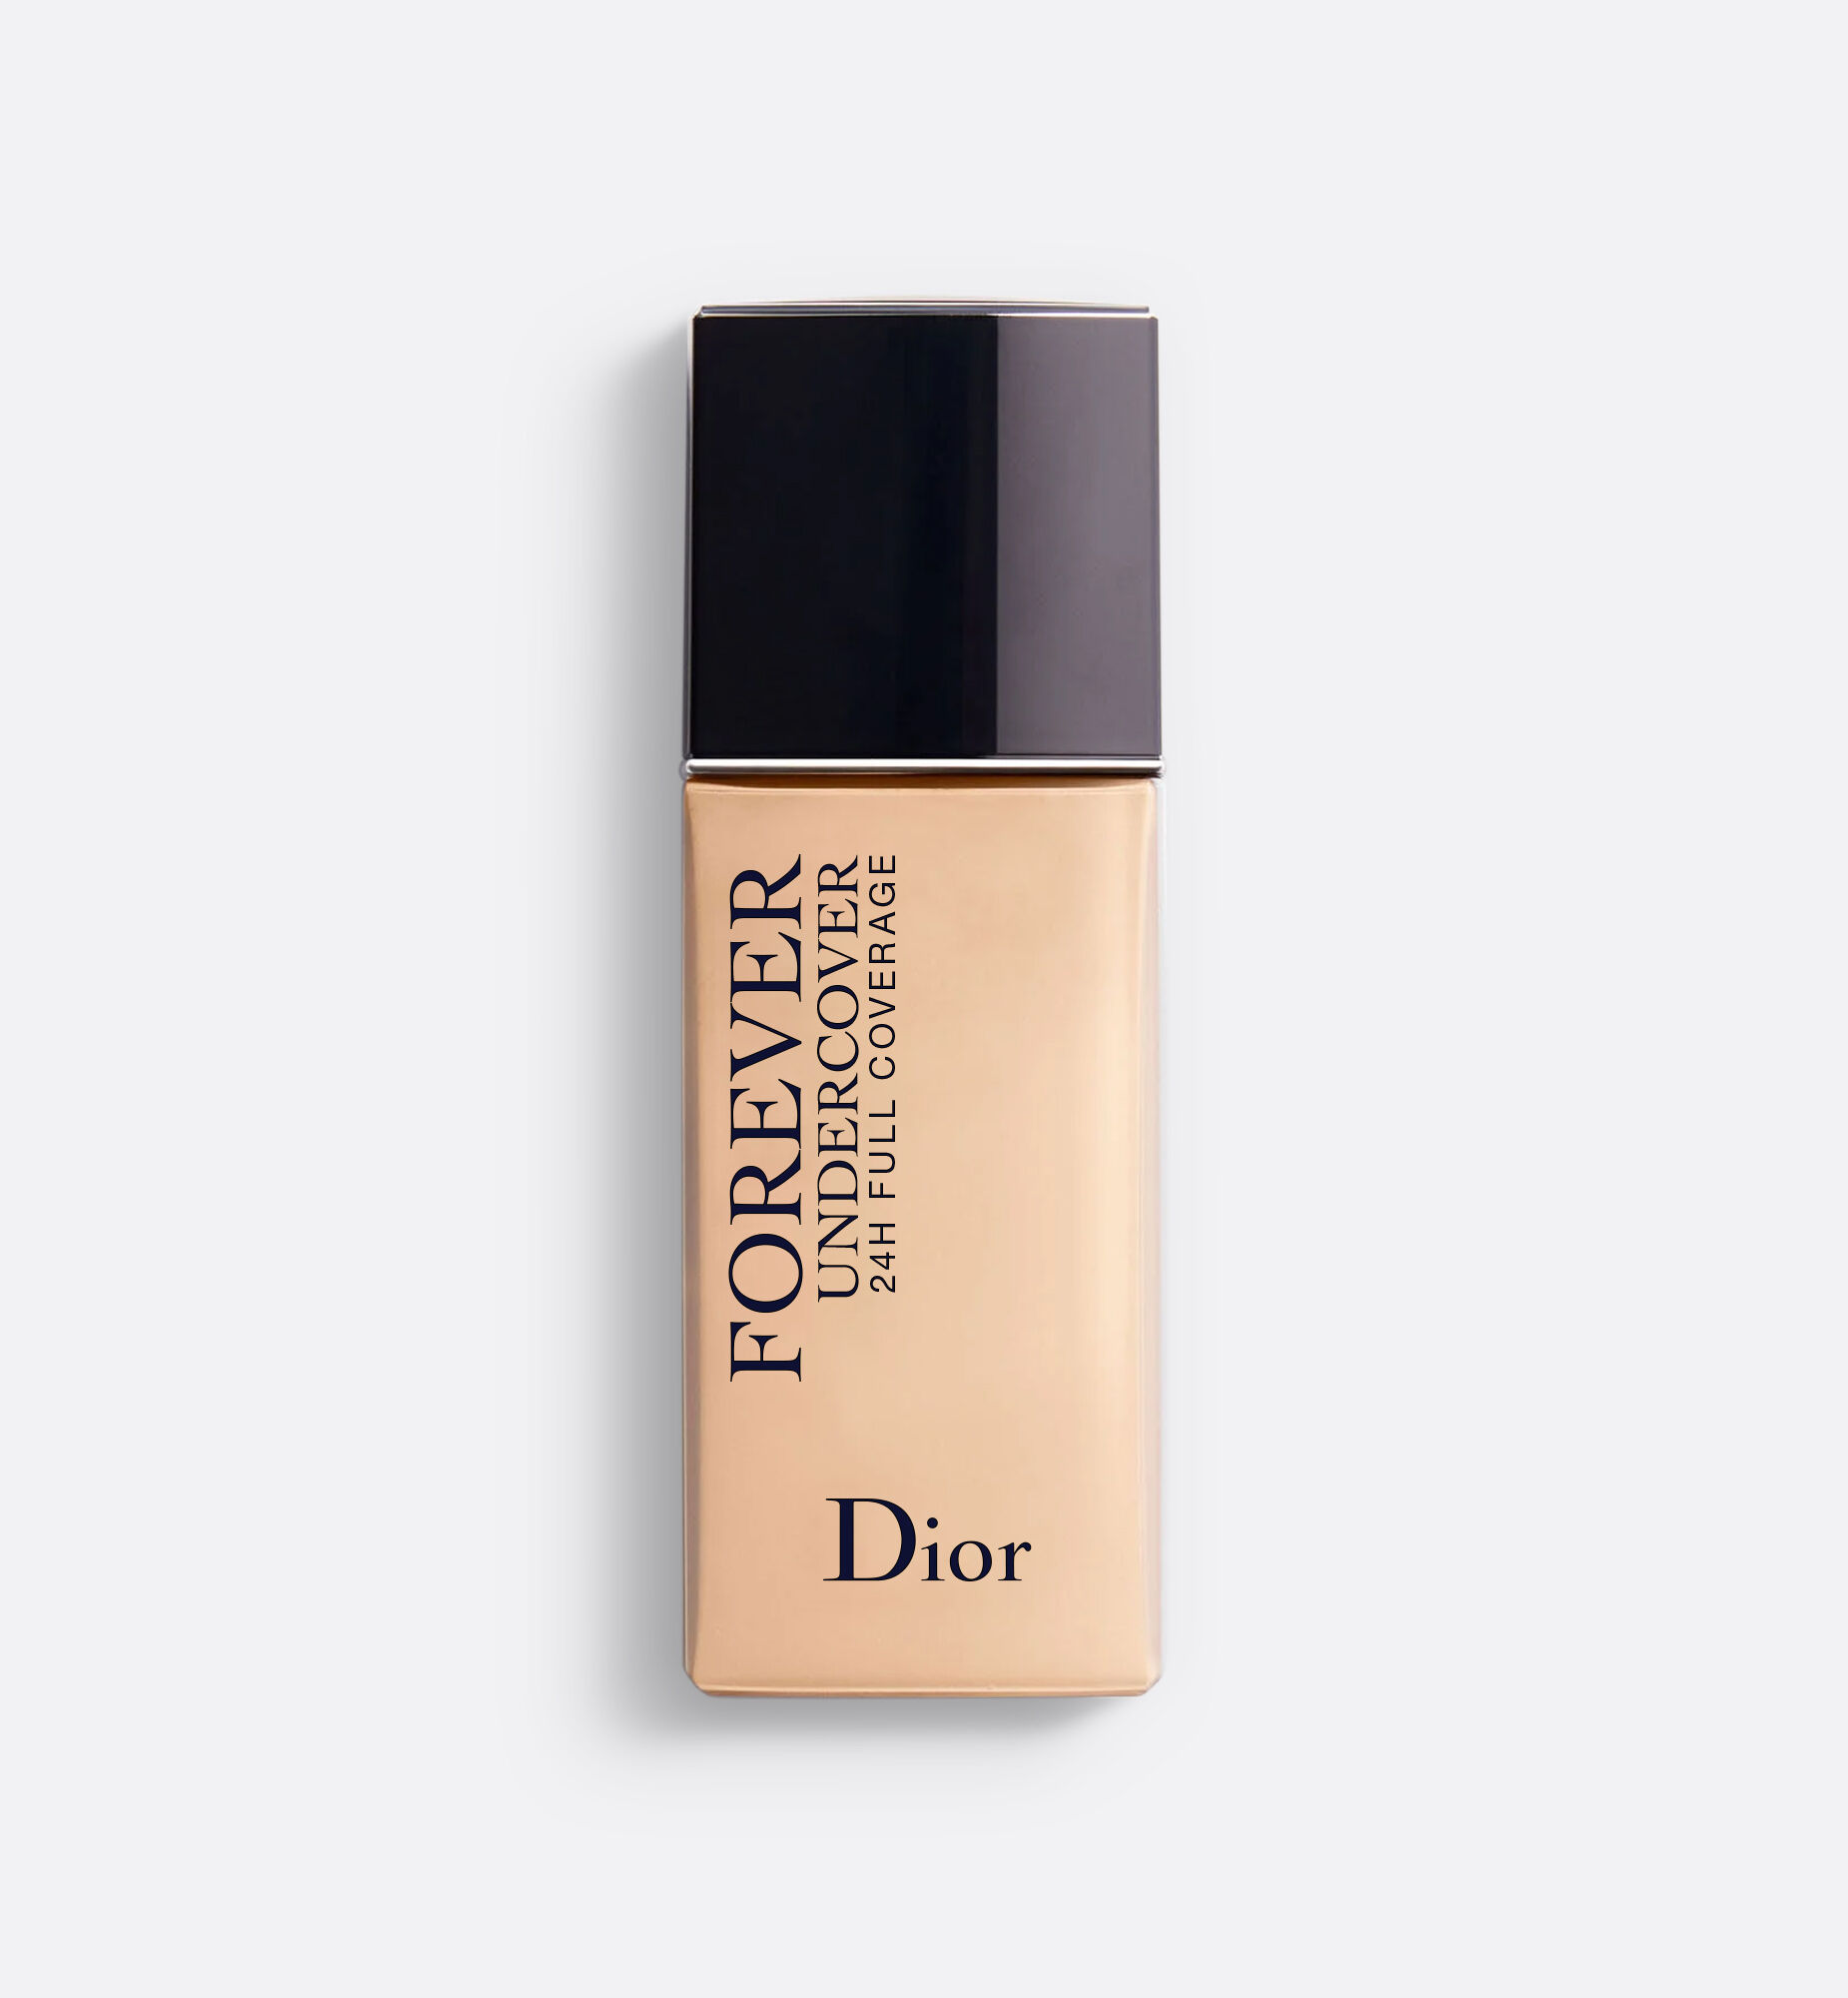 Dior Diorskin Forever Undercover Foundation Review Swatches Photos   Beauty Trends and Latest Makeup Collections  Chic Profile